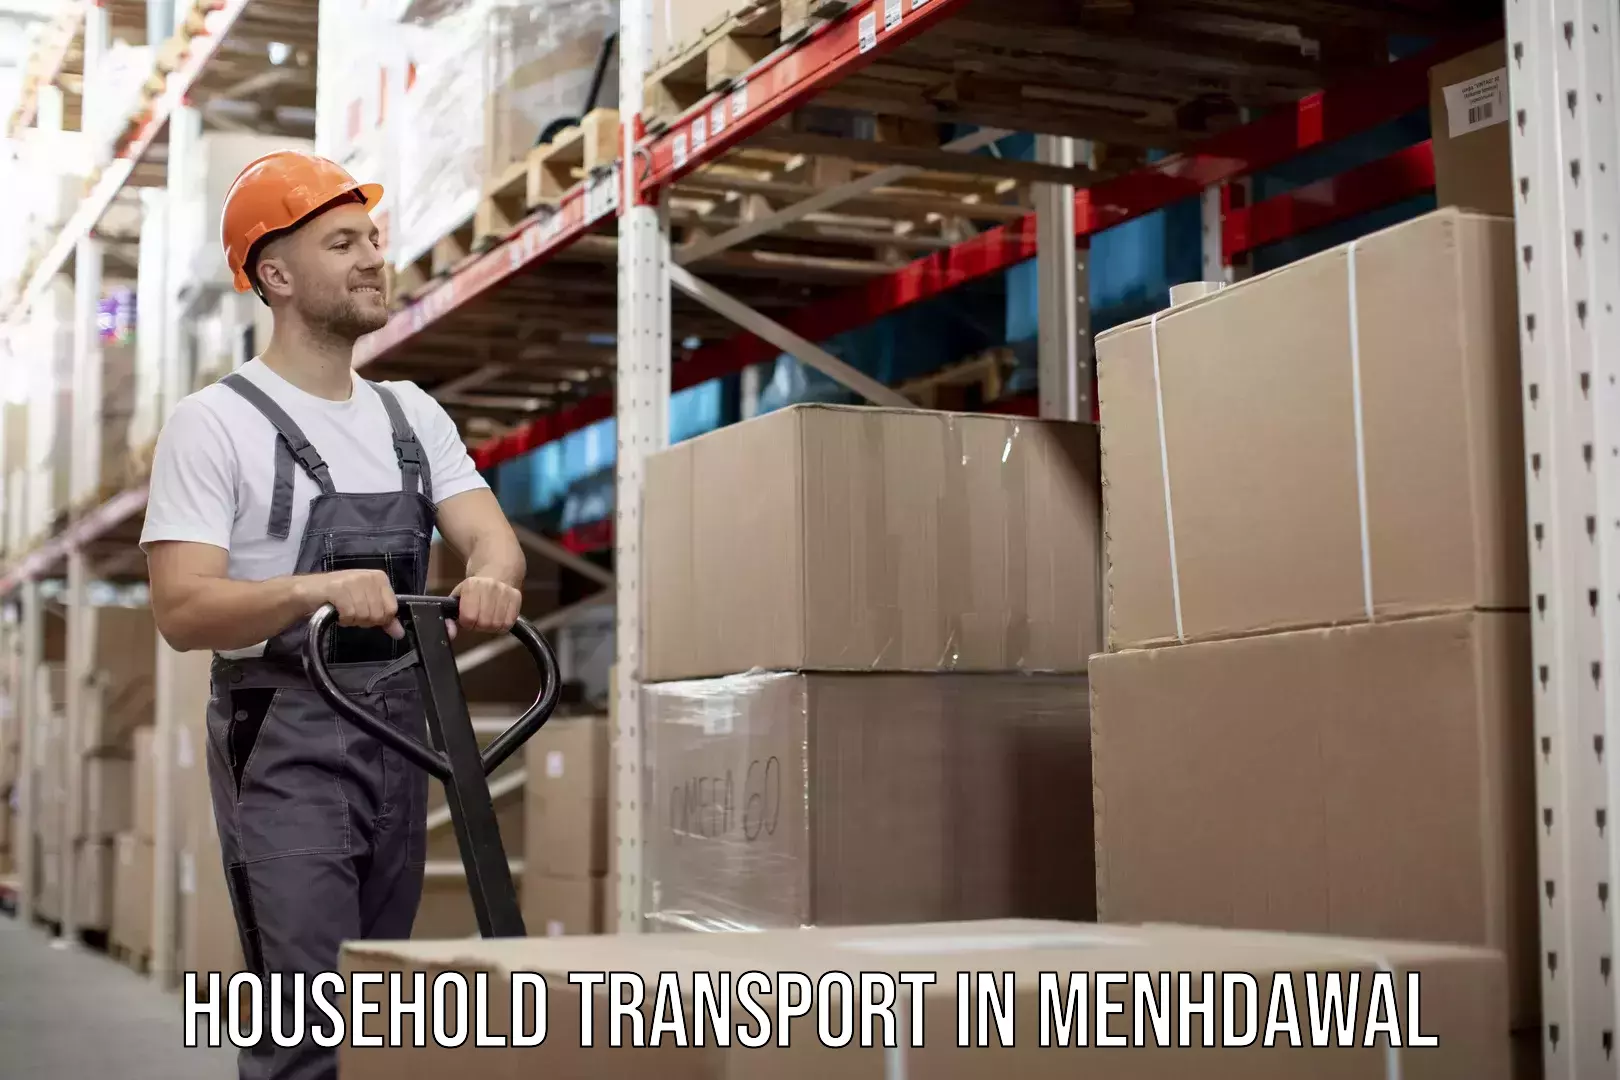 Reliable goods transport in Menhdawal